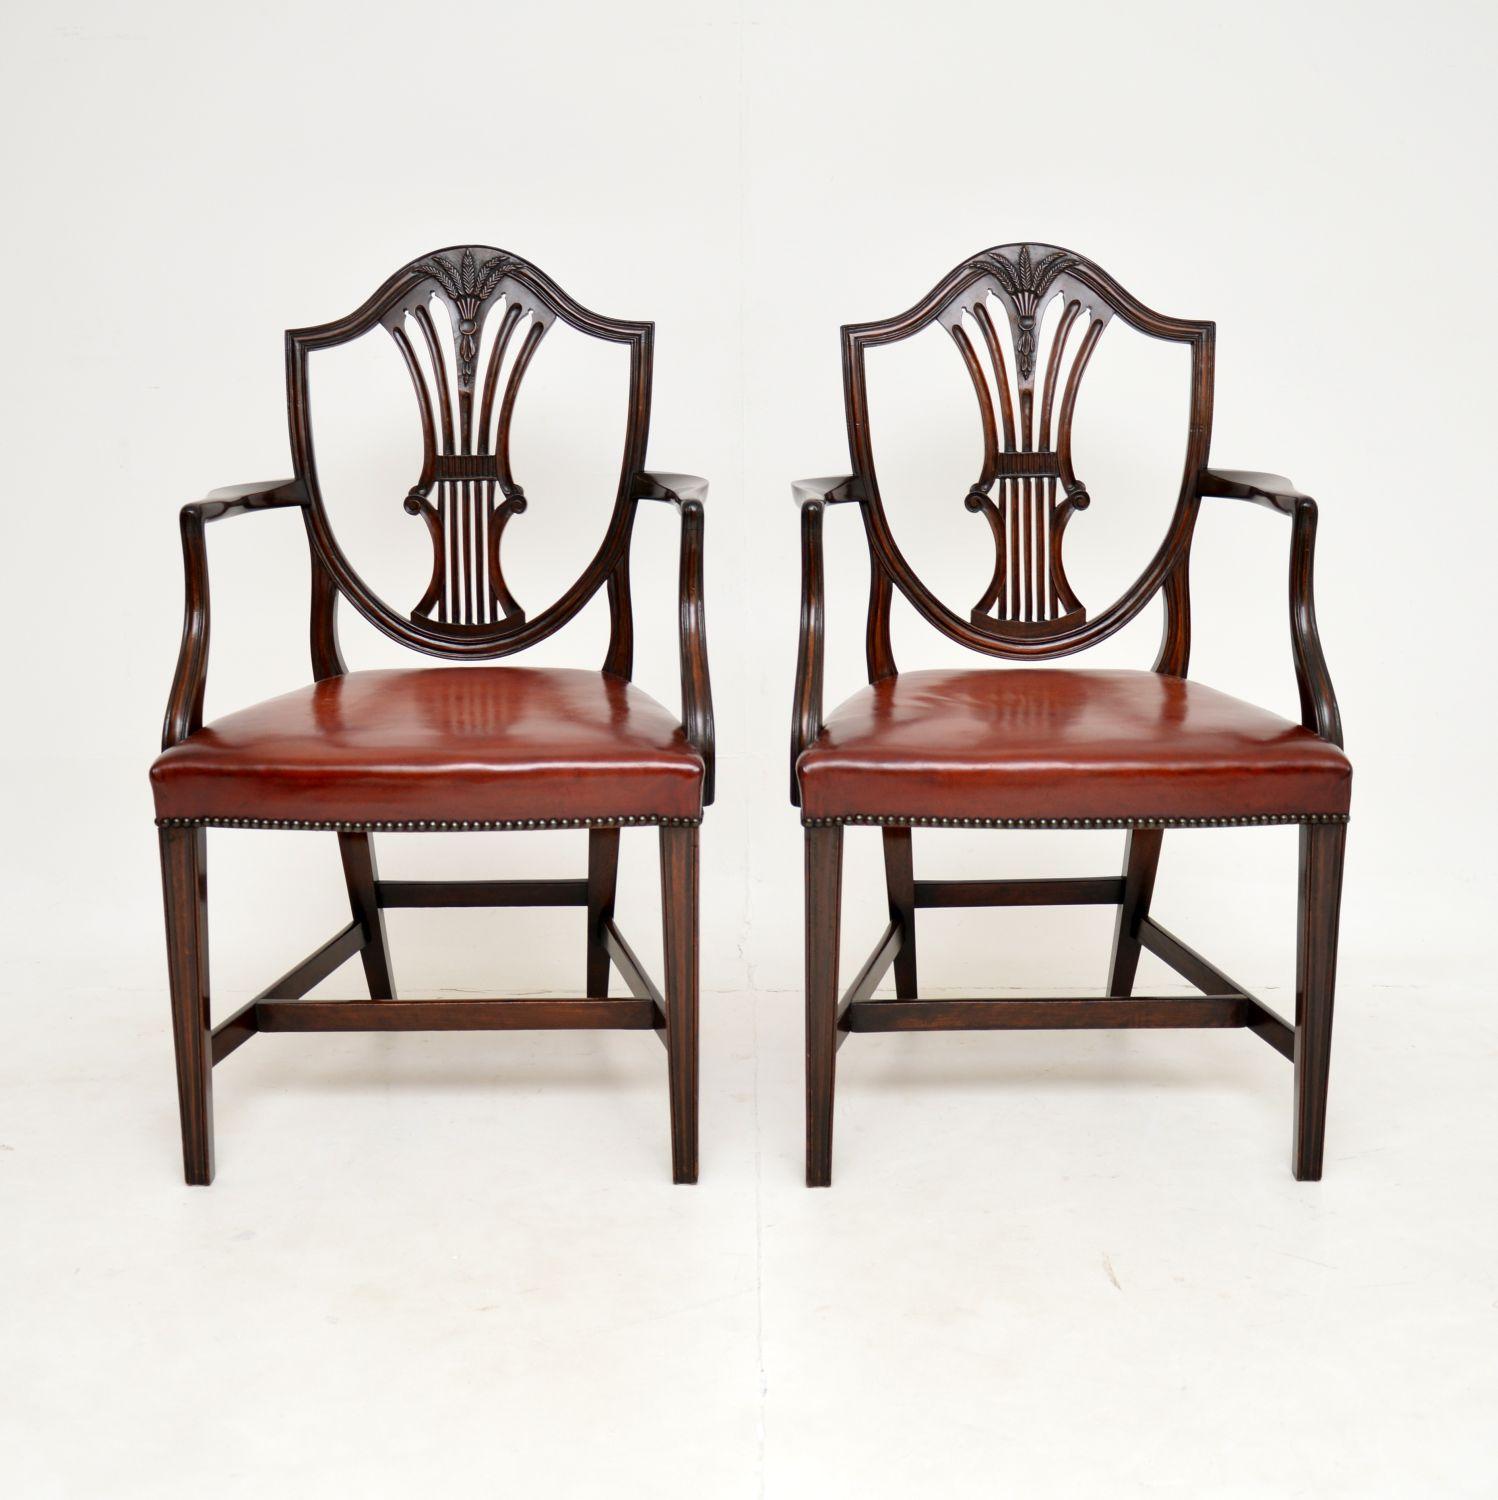 A smart and very well made pair of antique carver chairs, with leather seats. They were made in England, and date from around the 1900-1910 period.

They are beautifully made and are of very fine quality. The pierced backs have lovely intricate